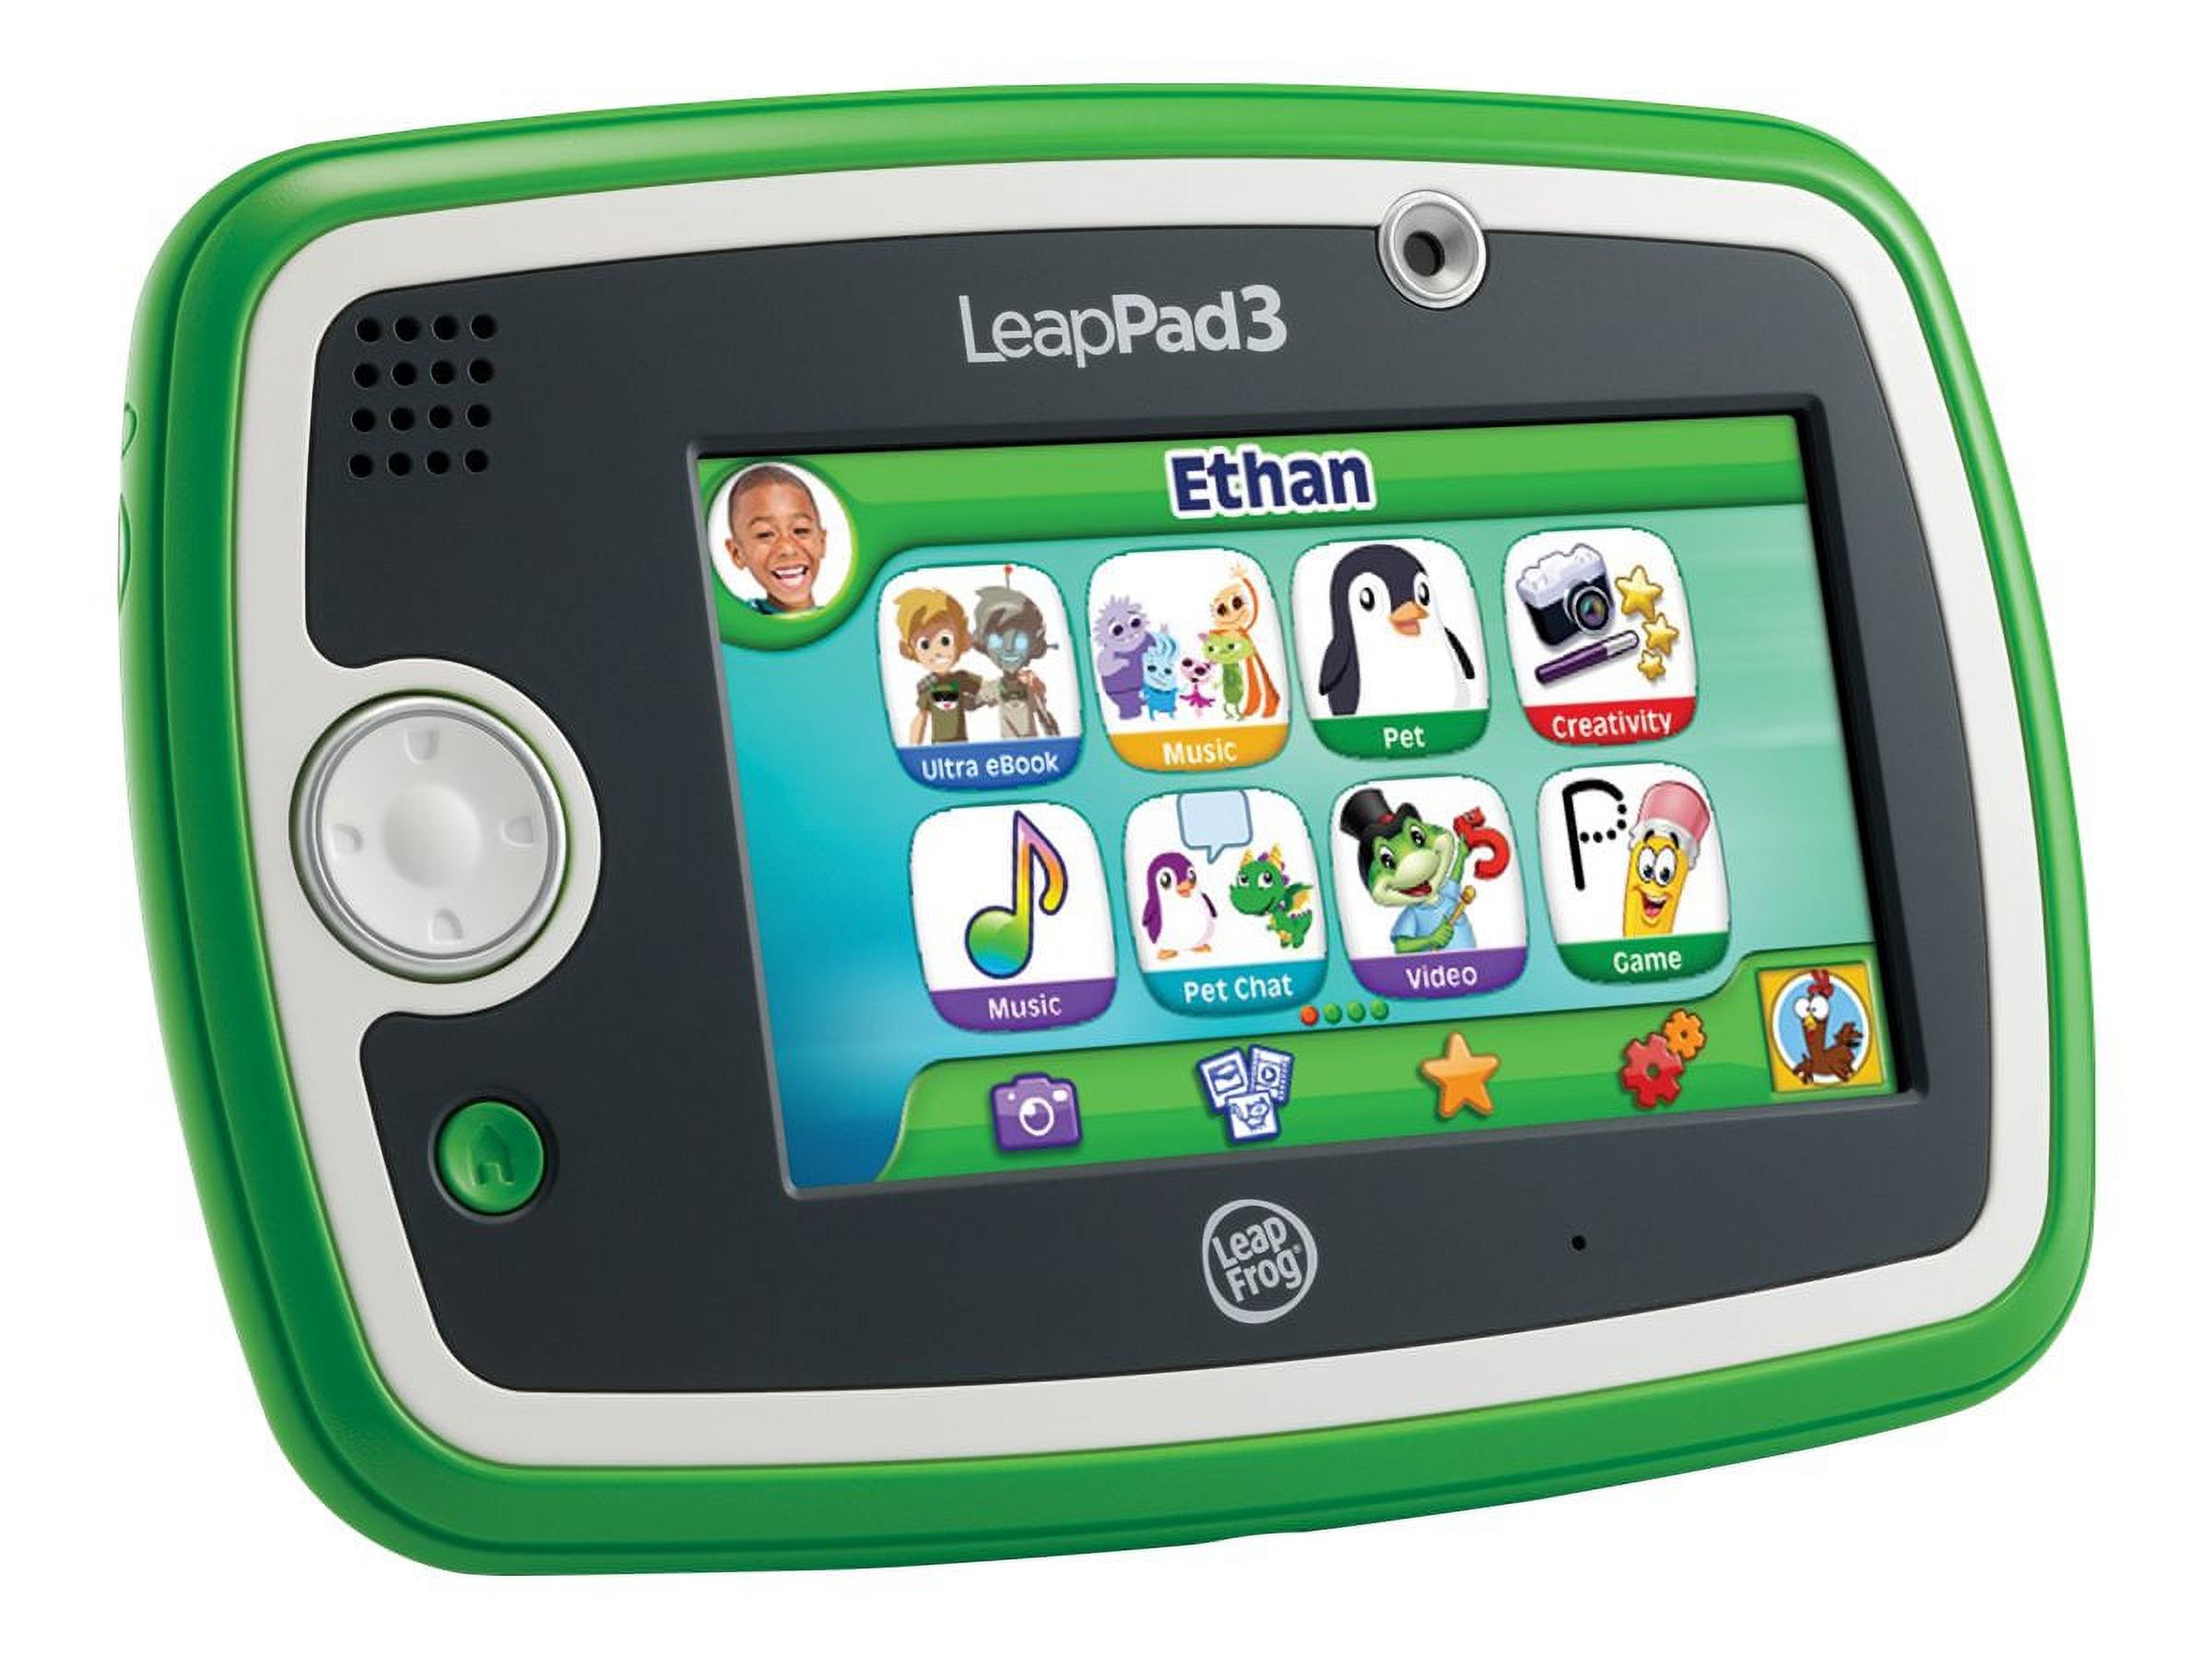 LeapFrog LeapPad3 Kids' Learning Tablet with Wi-Fi, Green or Pink - image 5 of 10